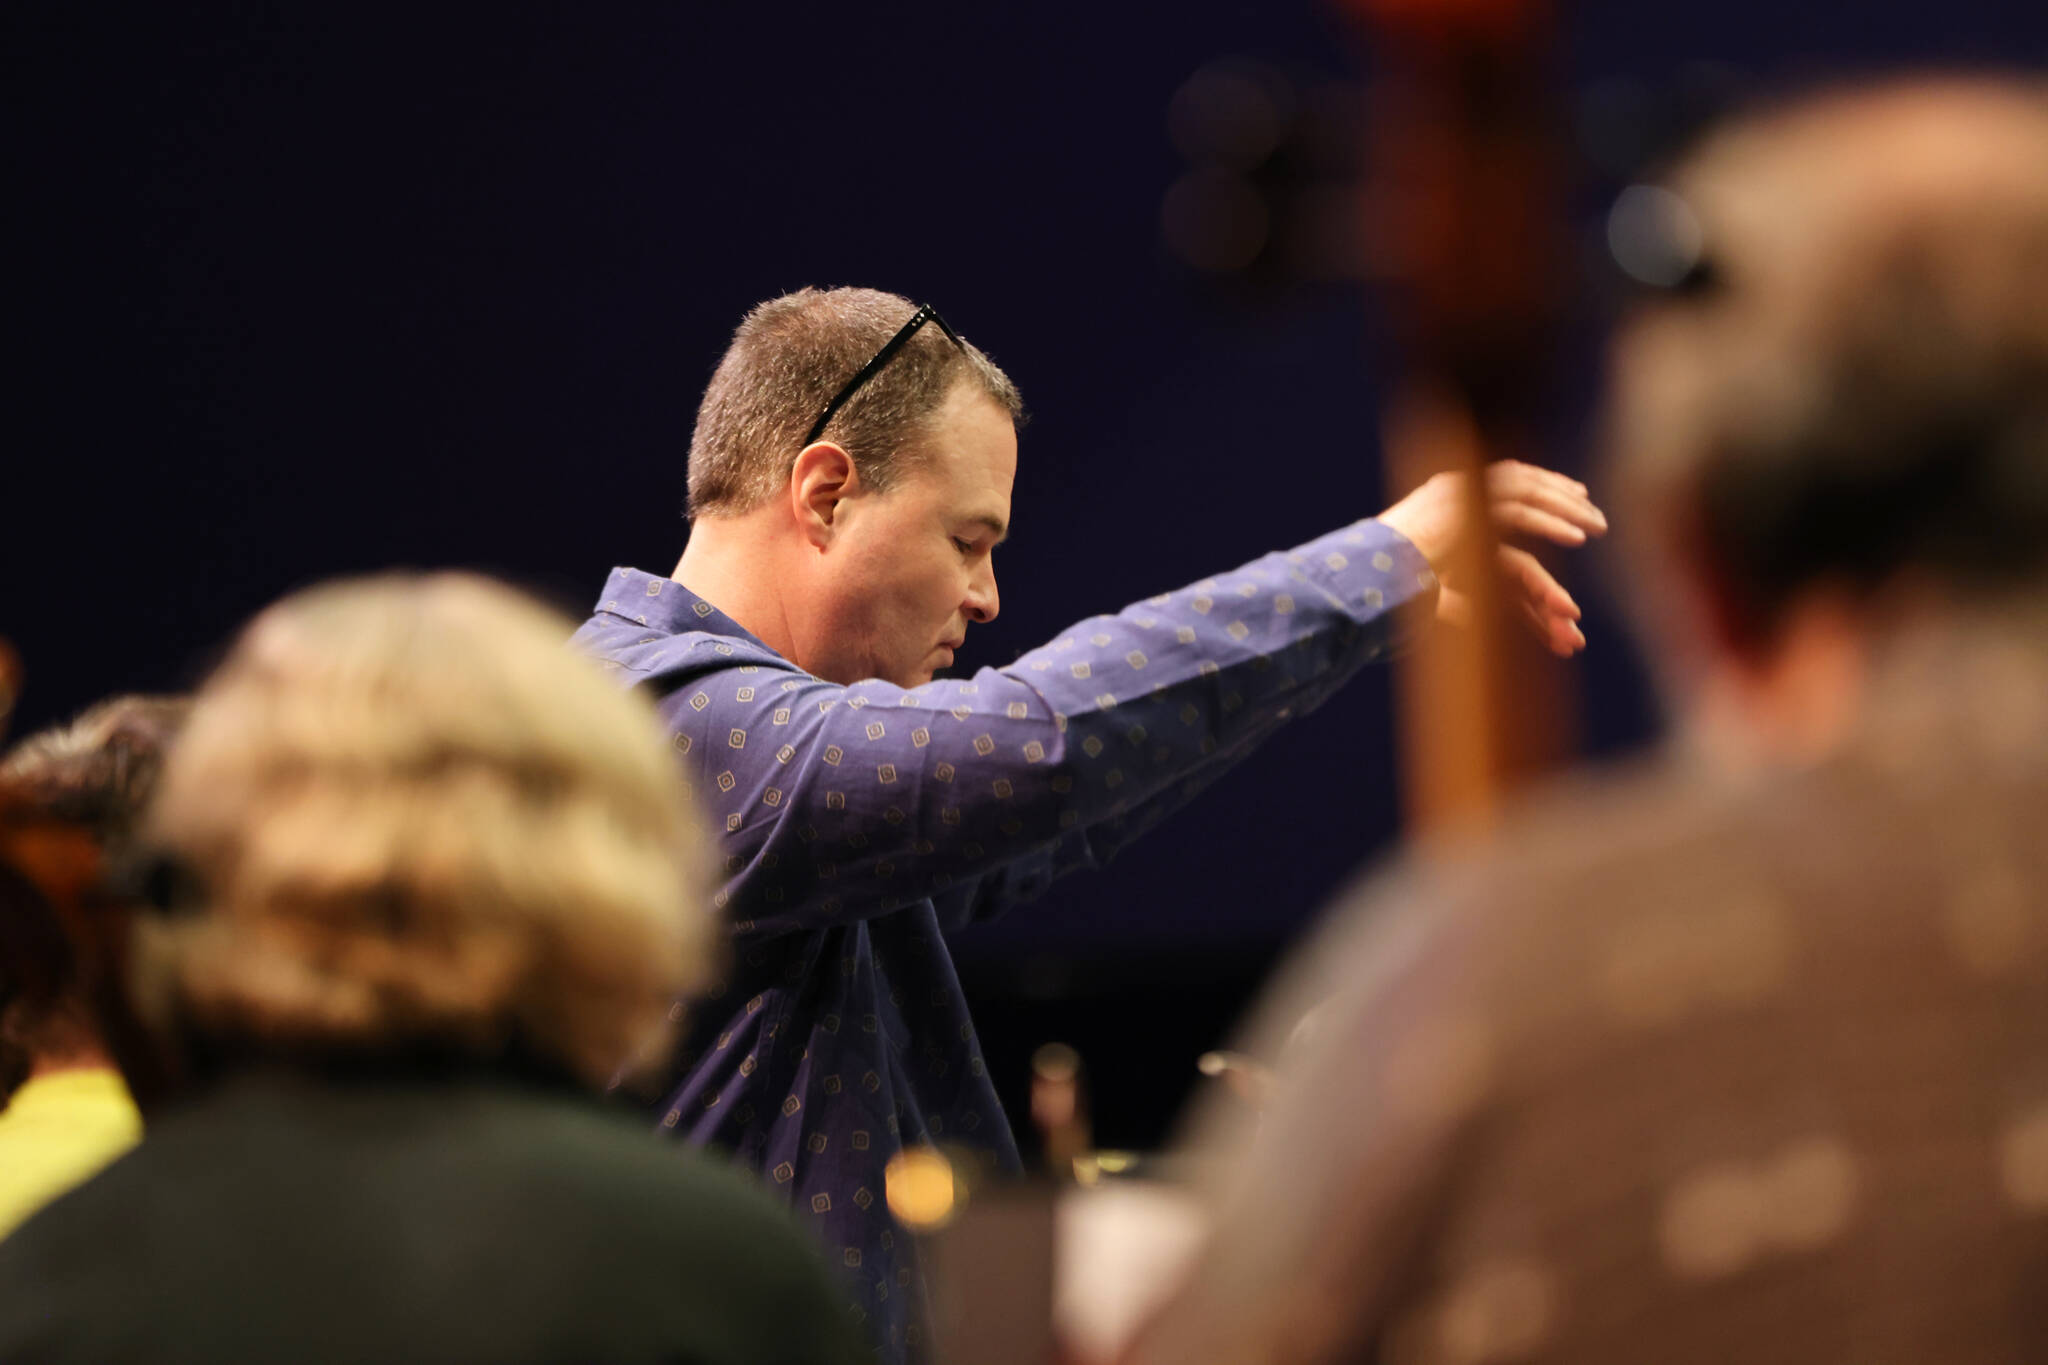 Christopher Koch, music director for the Juneau Symphony, leads the symphony’s string section through rehearsal ahead of Juneau Symphony’s Holiday Cheer concert. (Ben Hohenstatt / Juneau Empire)